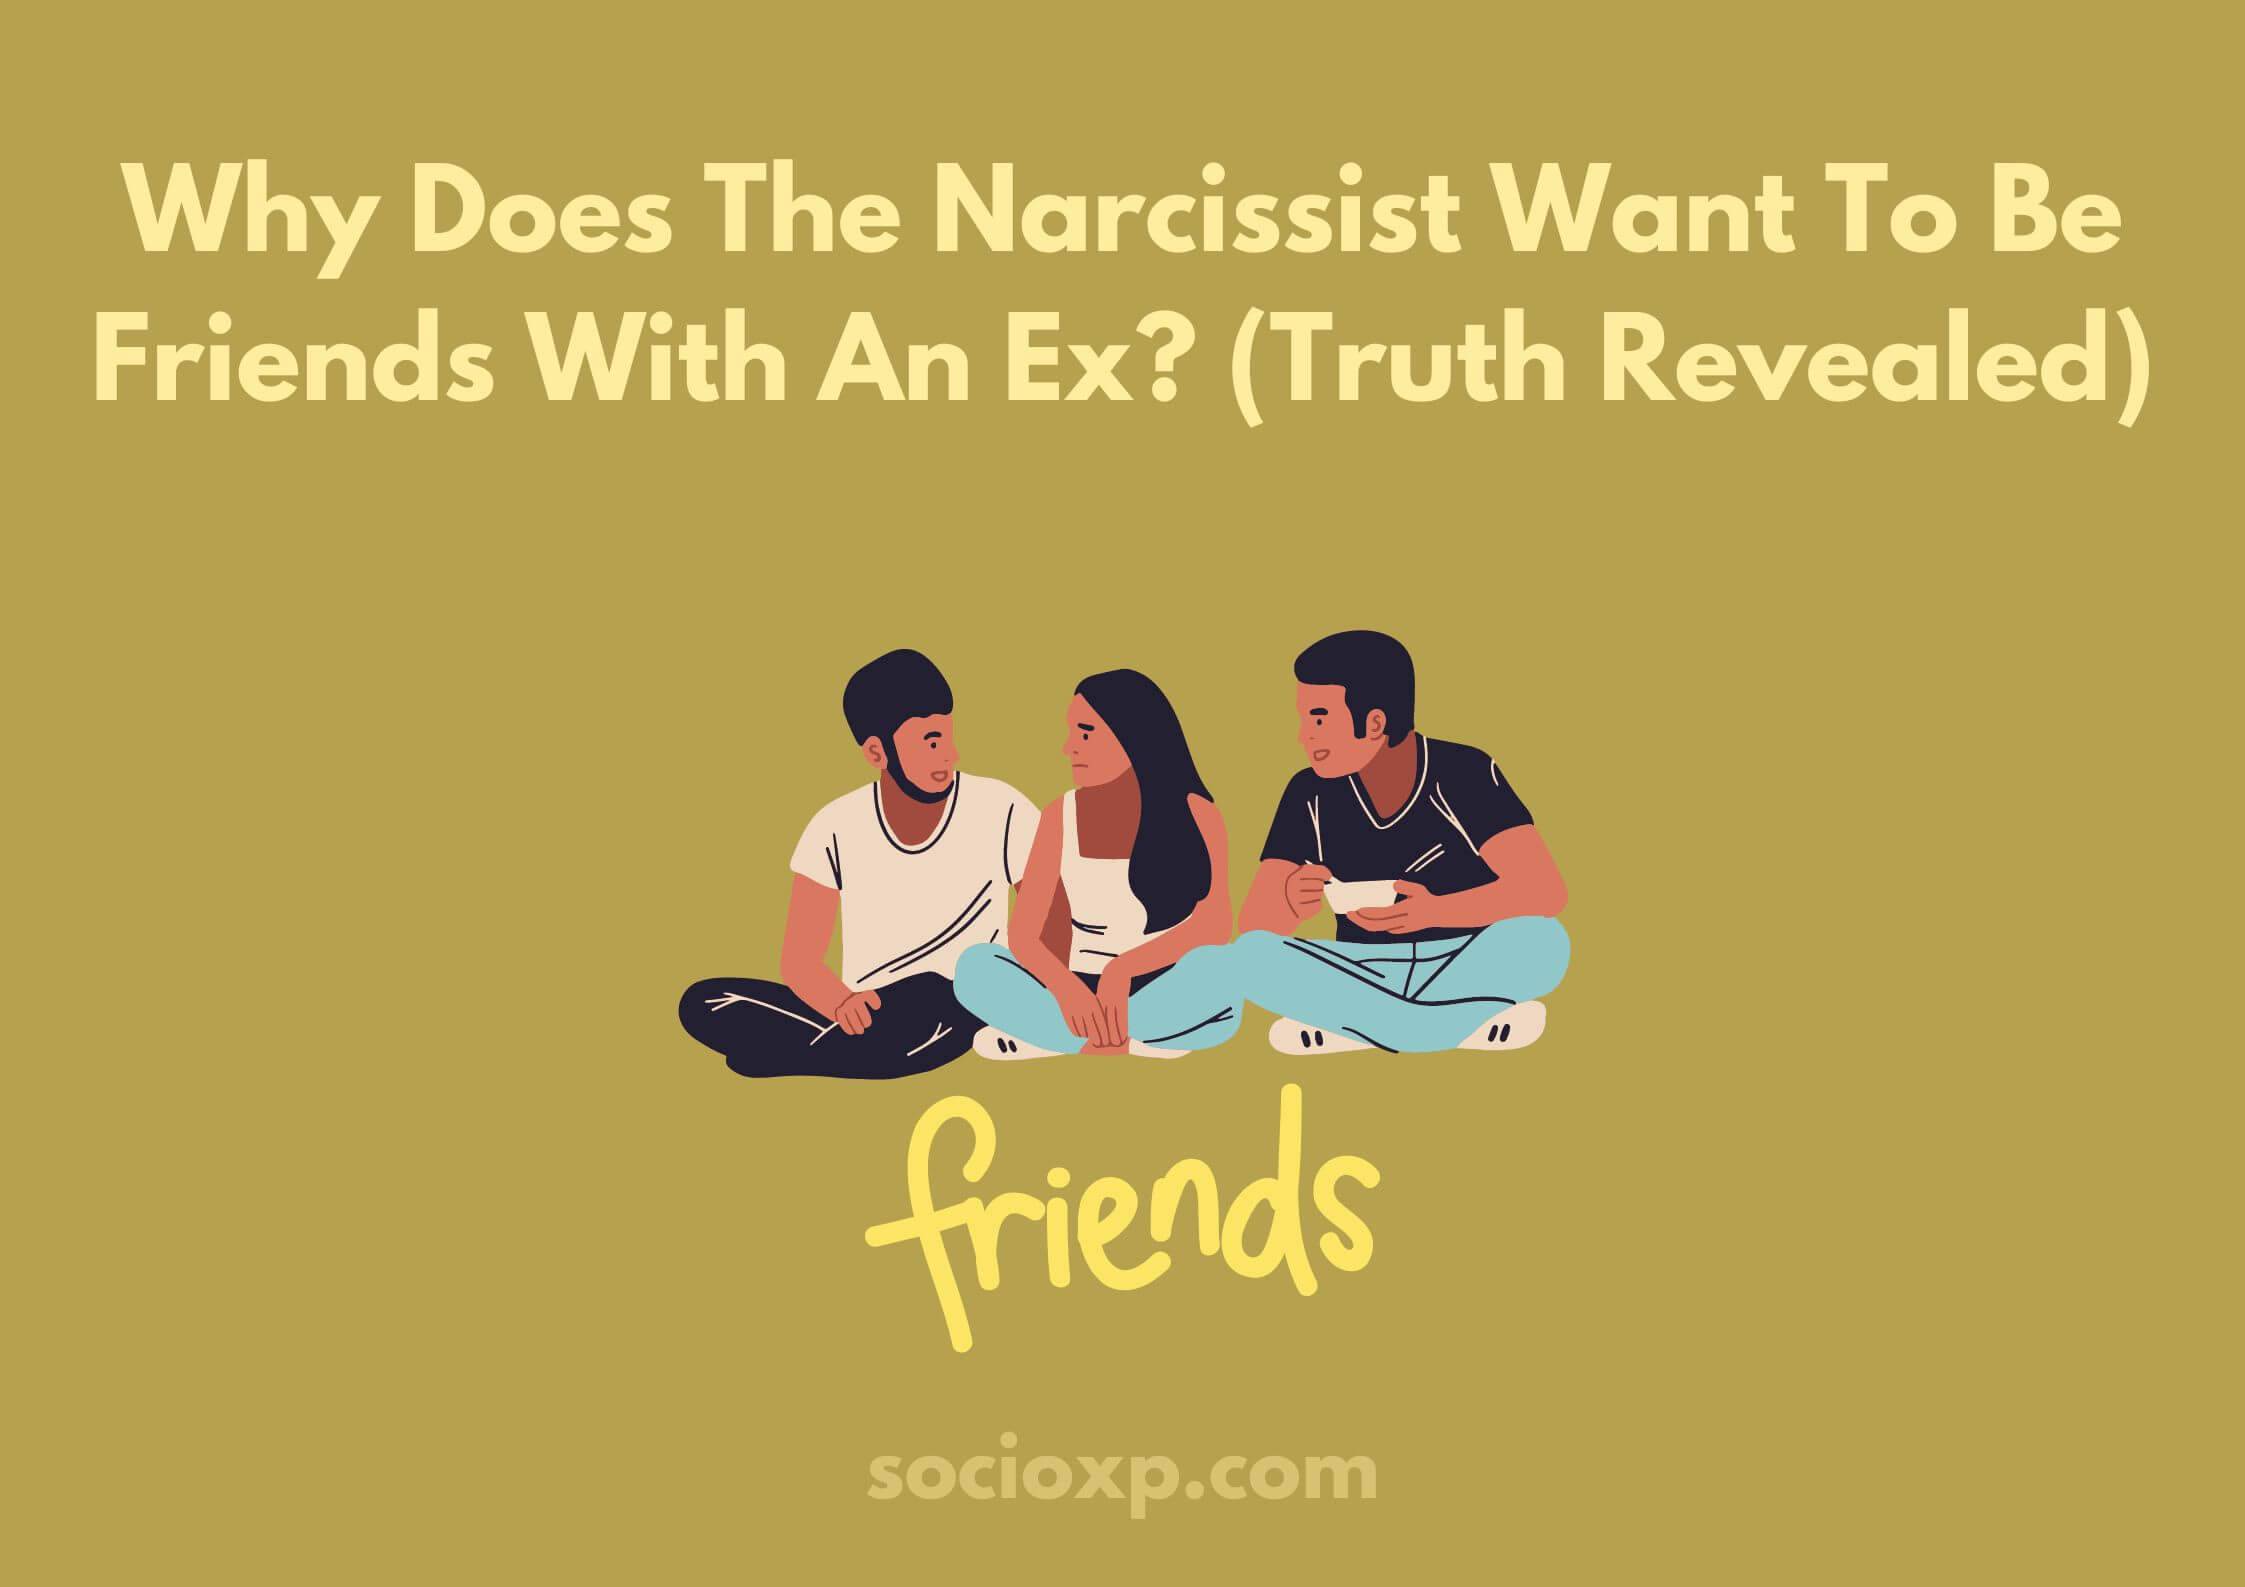 Why Does The Narcissist Want To Be Friends With An Ex? (Truth Revealed)